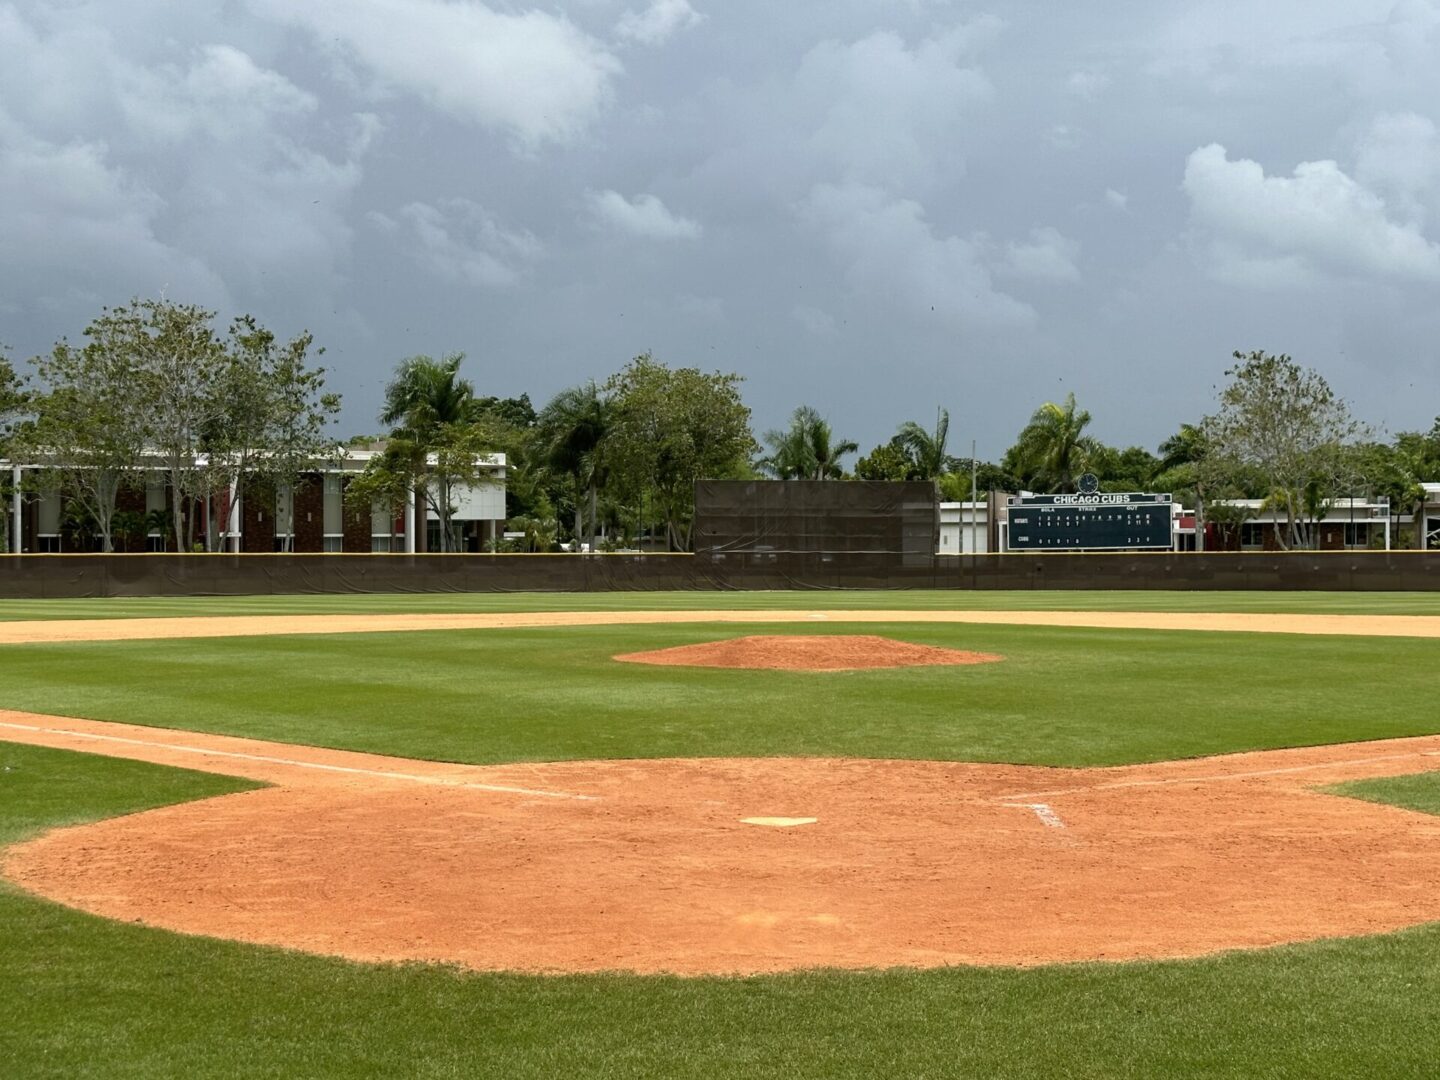 A baseball field with the pitcher 's mound in view.